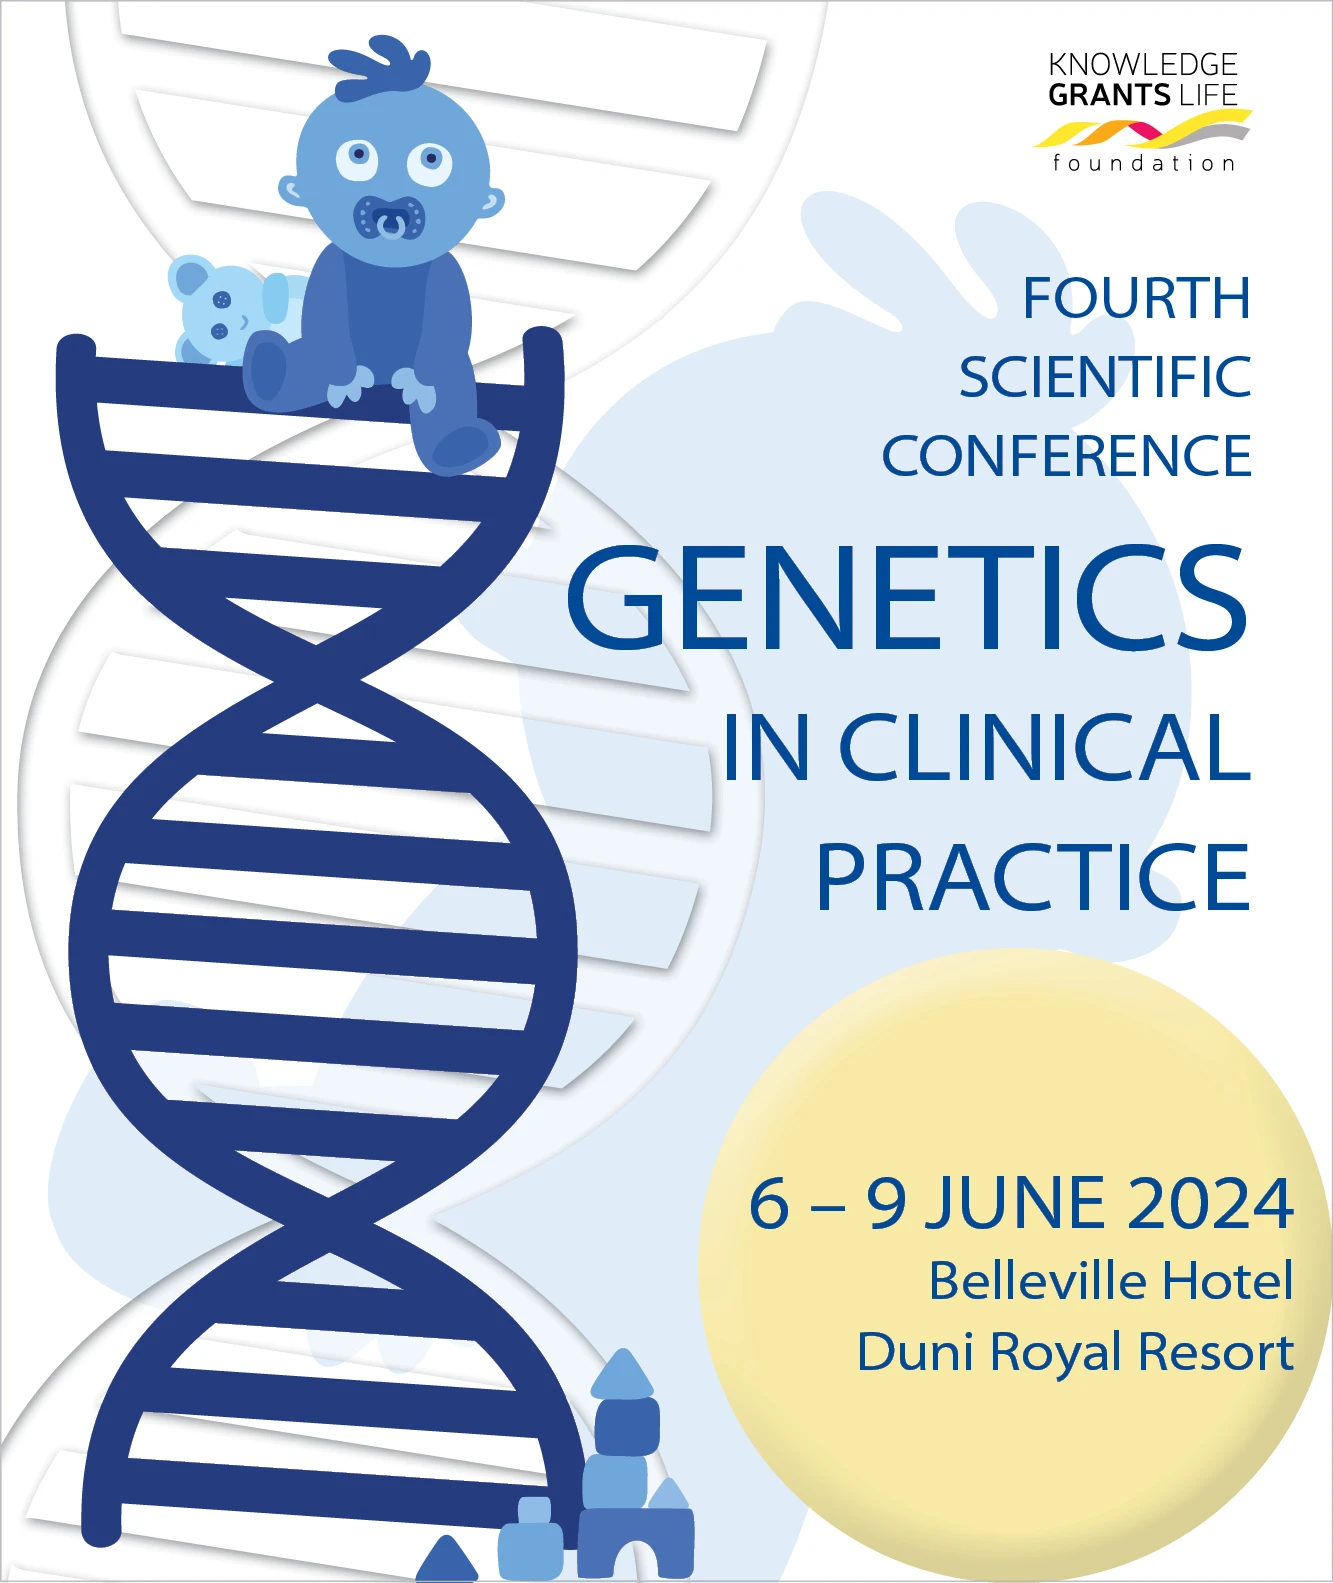 Fourth scientific conference "Genetics in clinical practice"